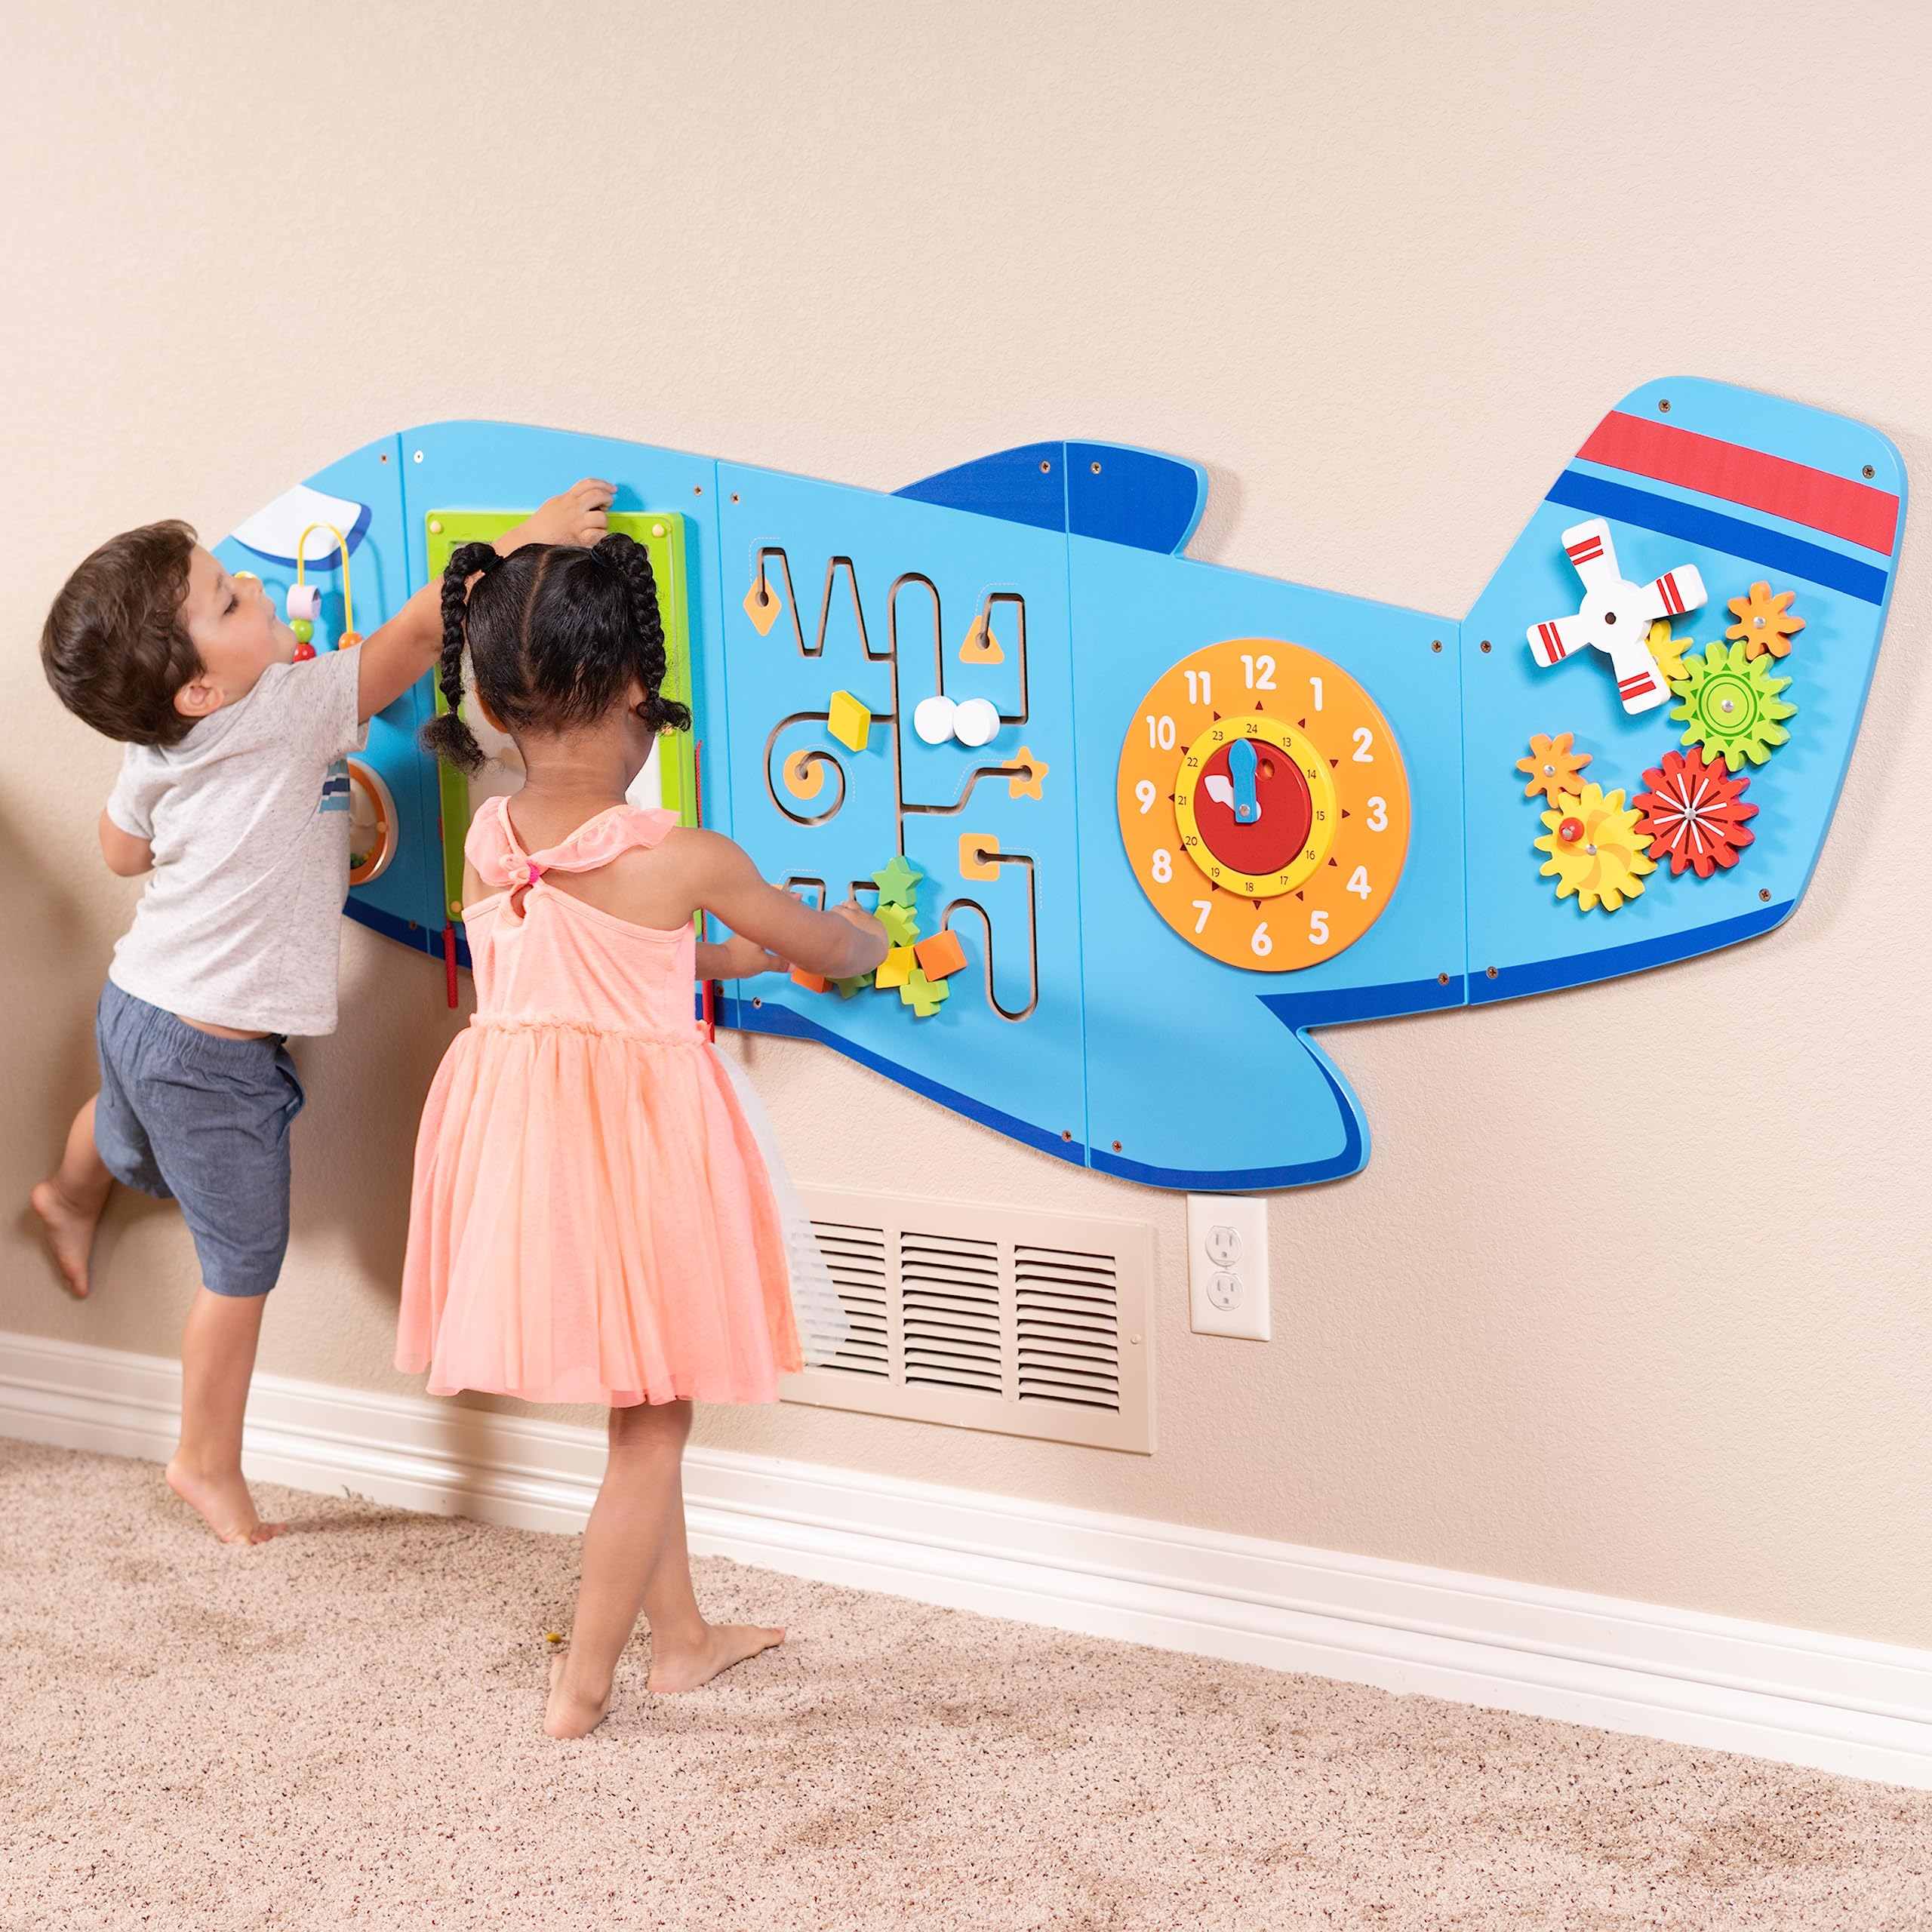 SPARK & WOW Airplane Activity Wall Panels - Ages 18m+ - Montessori Sensory Wall Toy - 6 Activities - Busy Board - Toddler Room Decor